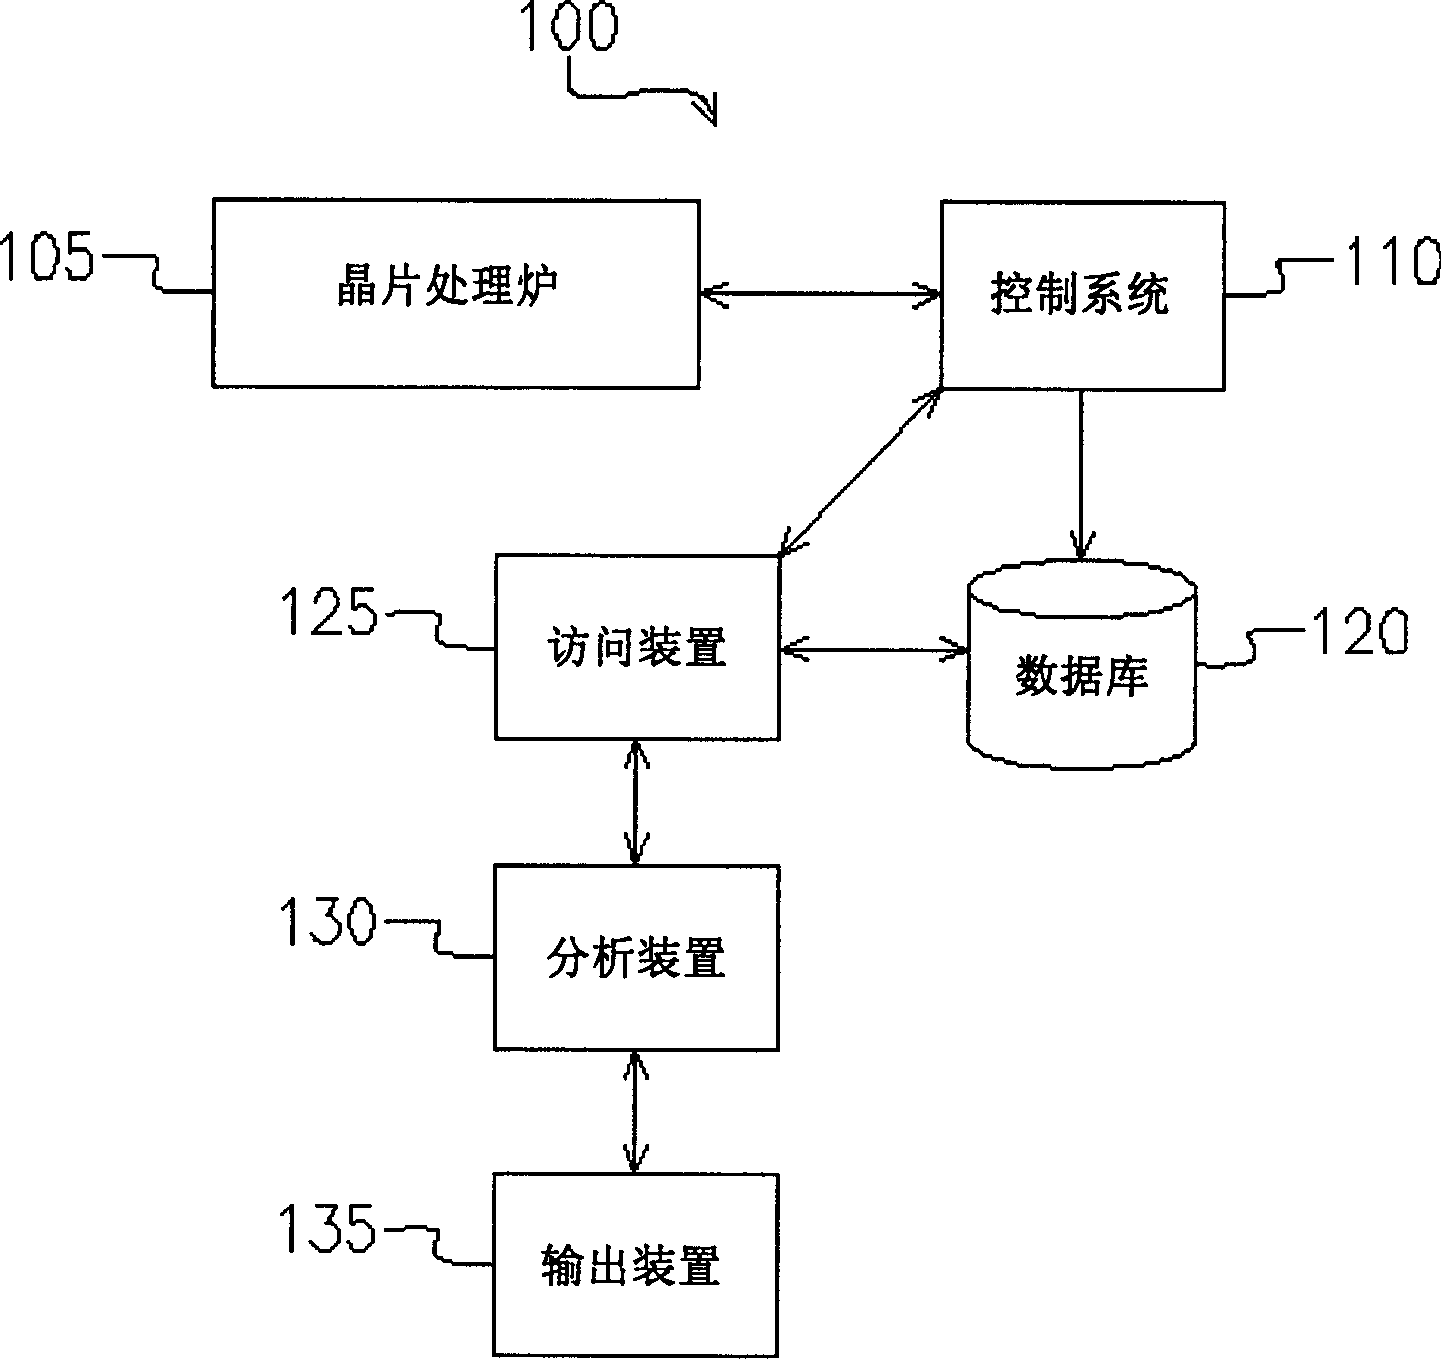 Parameter monitoring system and method for wafer processing capacity per hour of wafer processing furnace